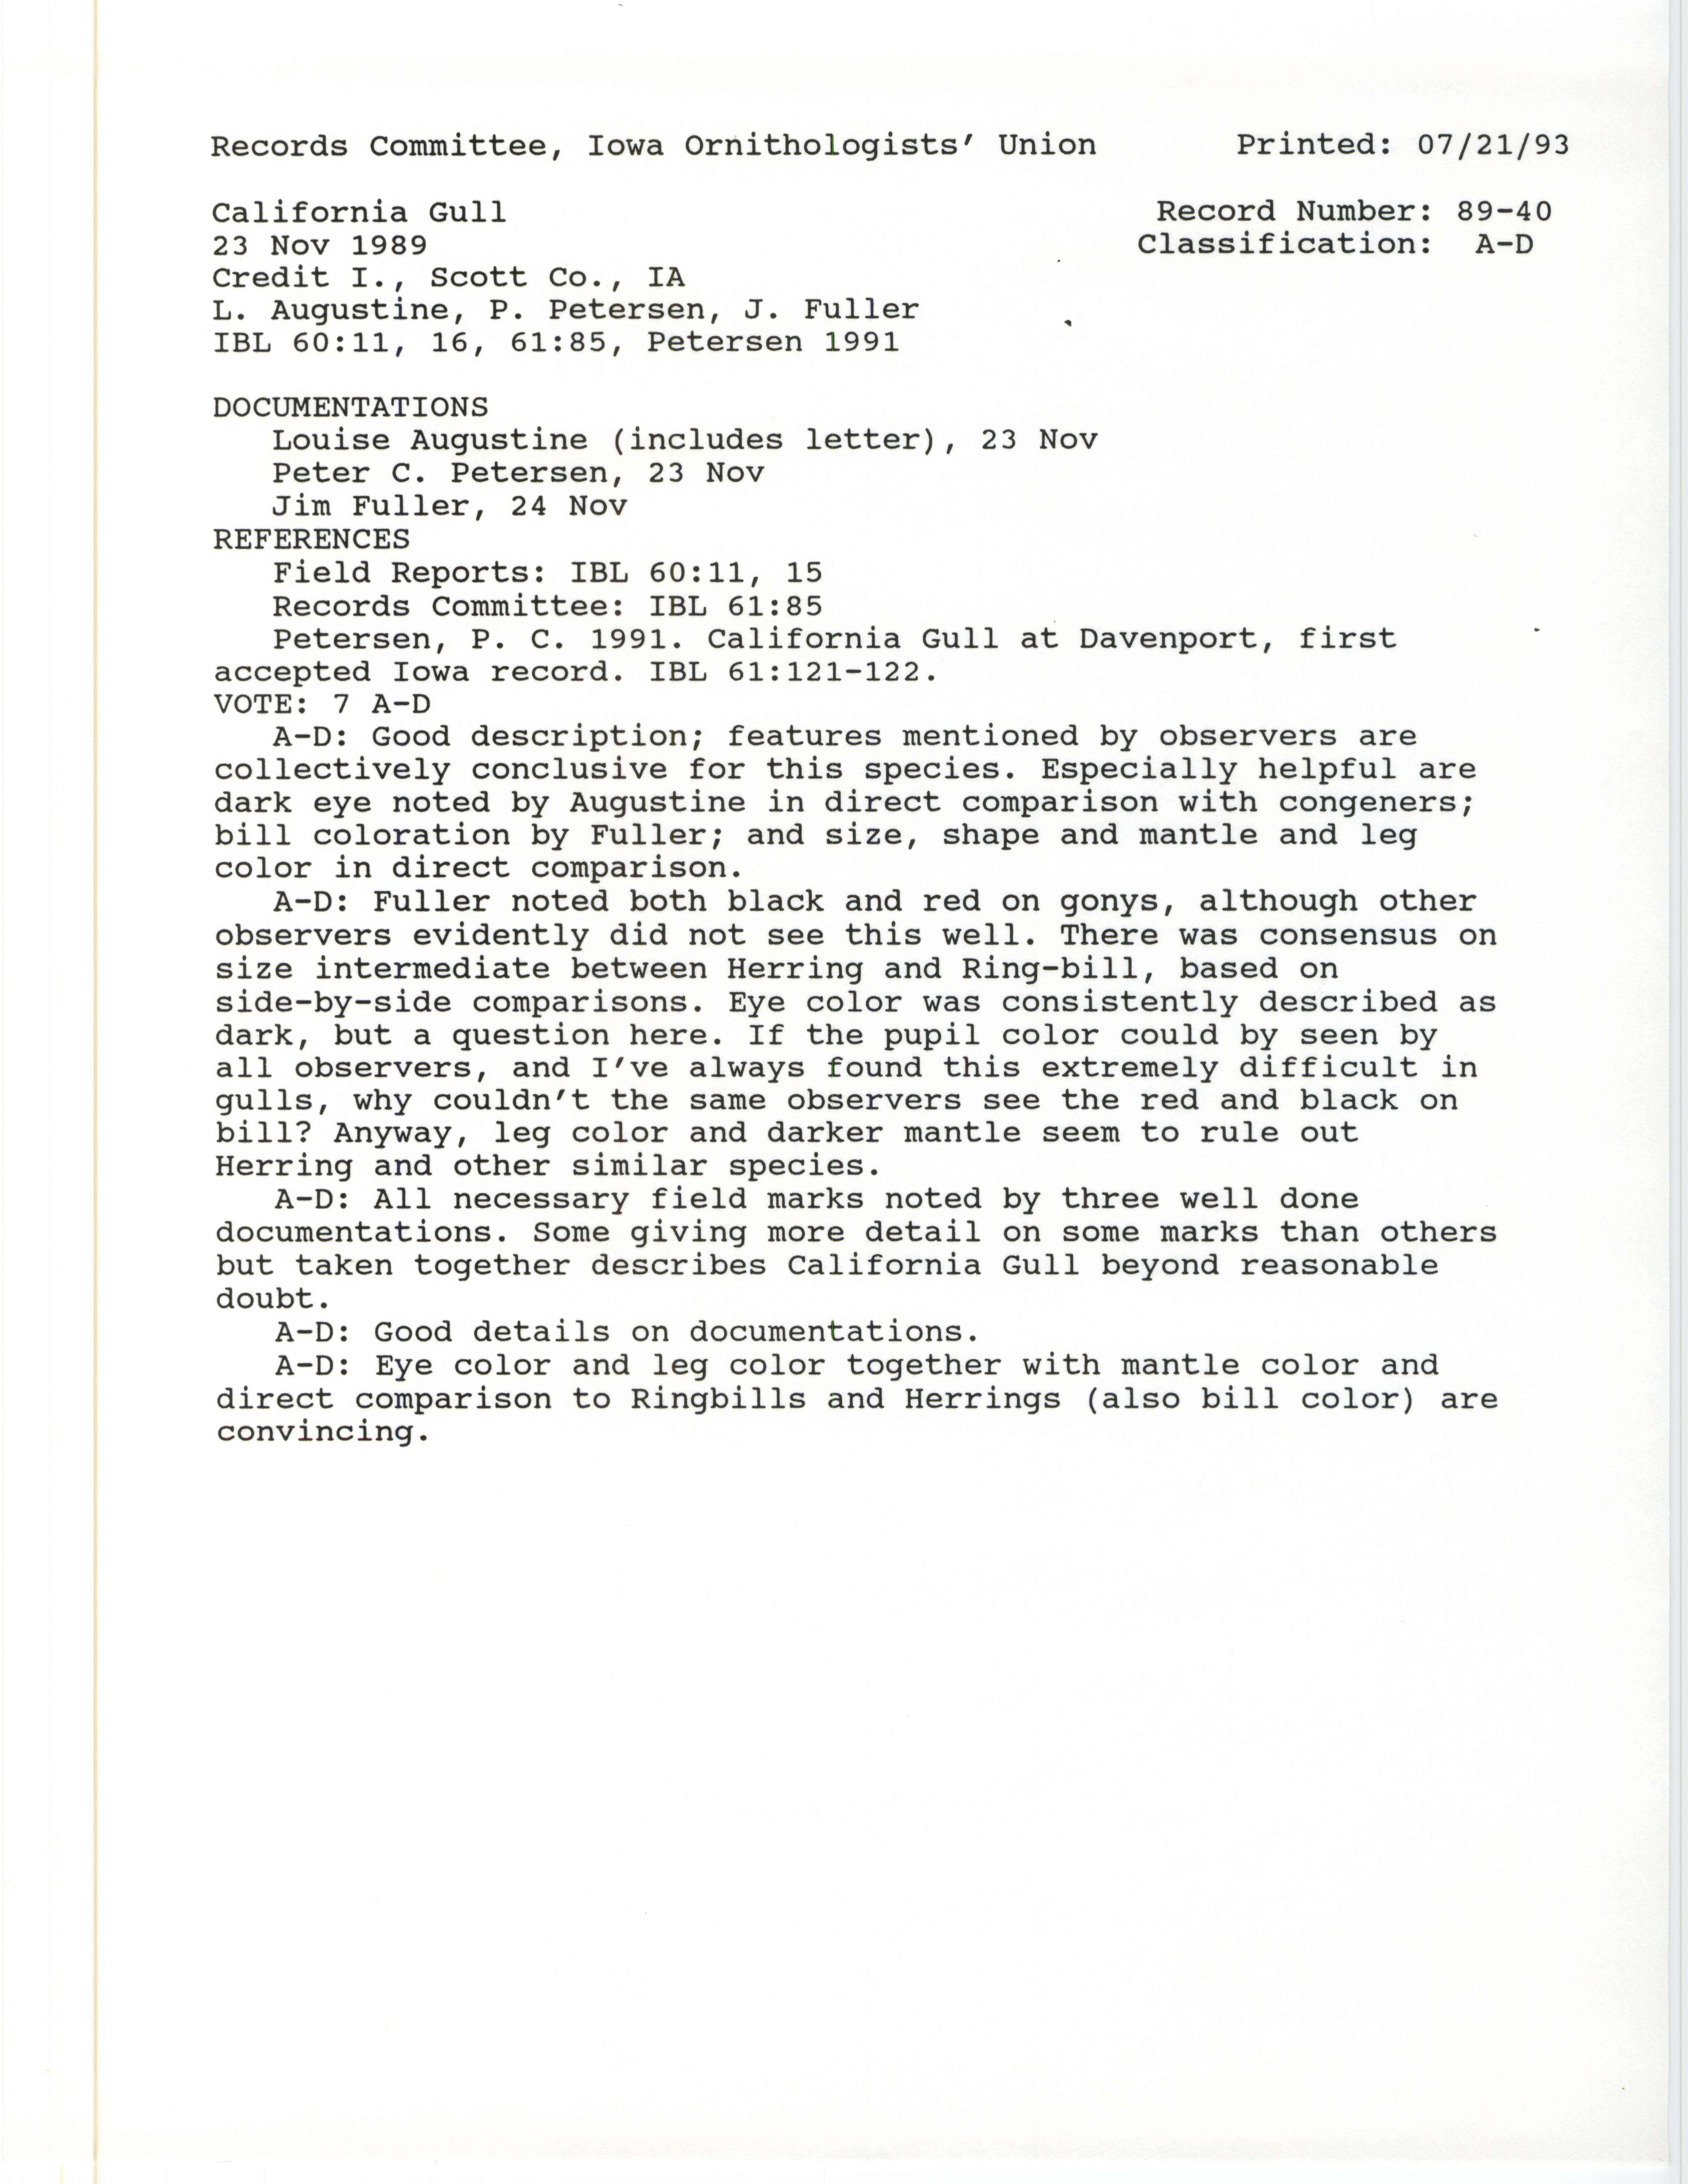 Records Committee review for rare bird sighting of California Gull at Credit Island, 1989